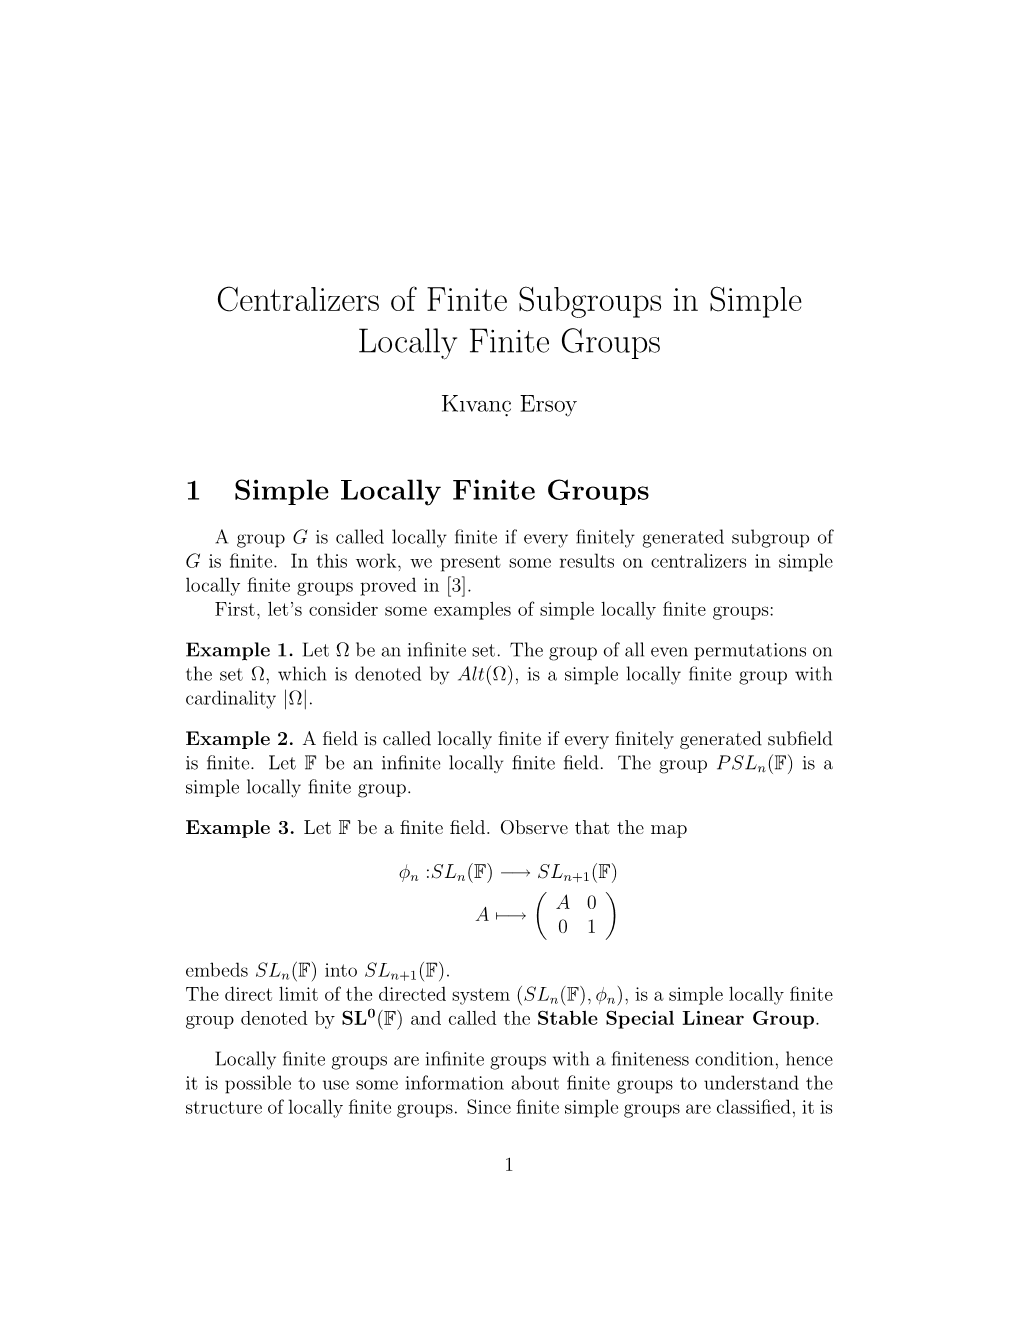 Centralizers of Finite Subgroups in Simple Locally Finite Groups